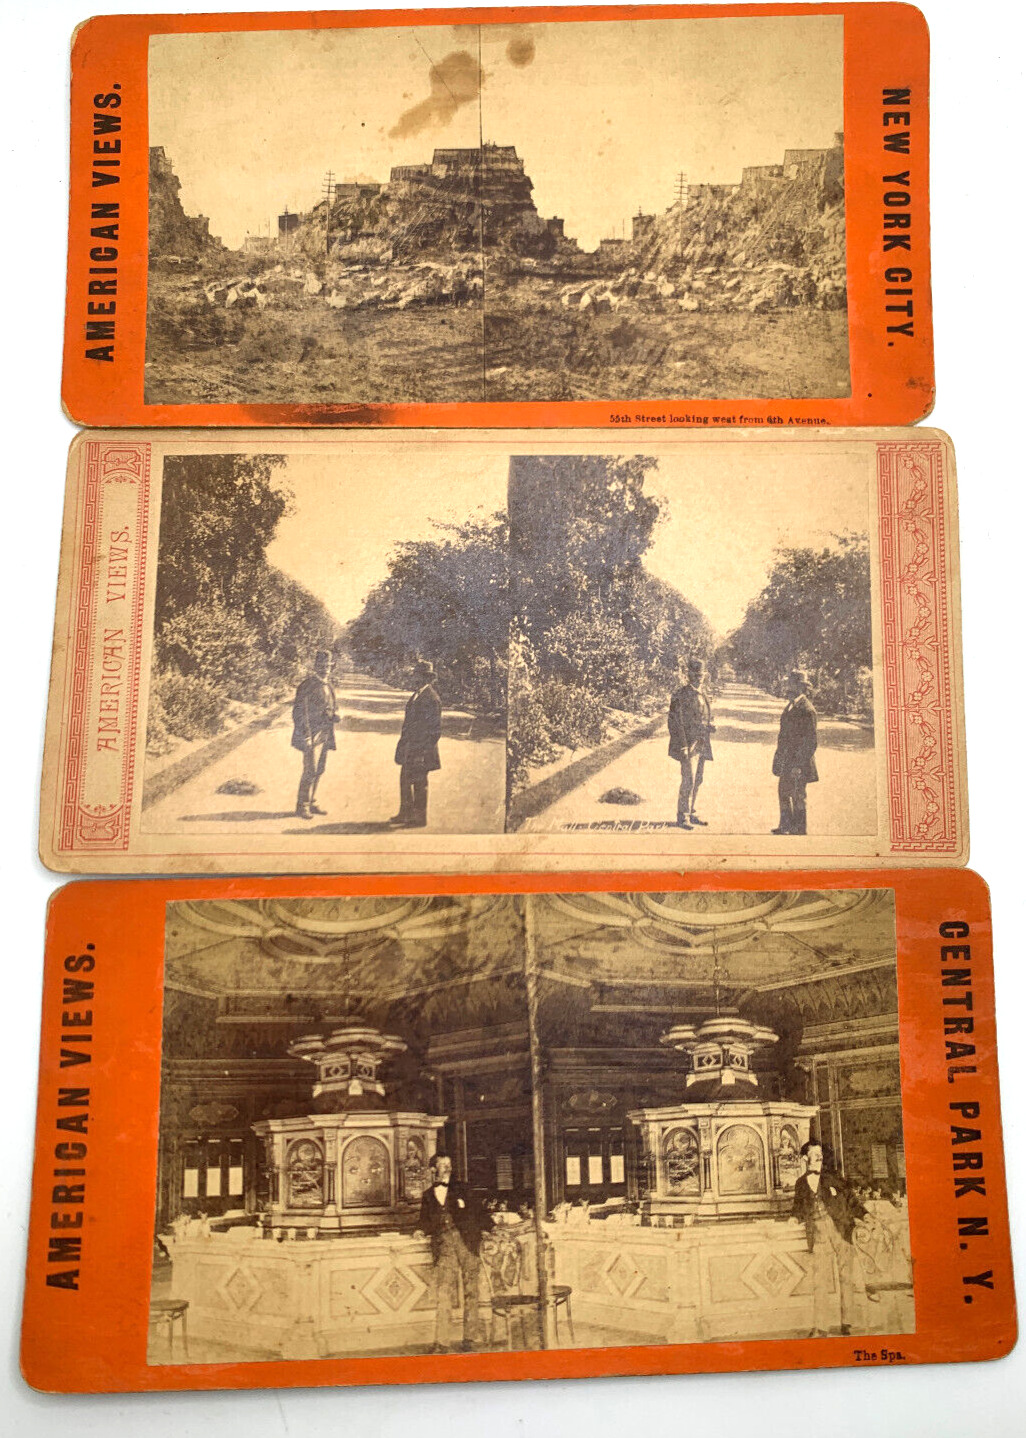 LOT 3 1880-1910? STEREOVIEW STEREOSCOPE CARDS NYC CENTRAL PARK SPA, MALL 55th ST